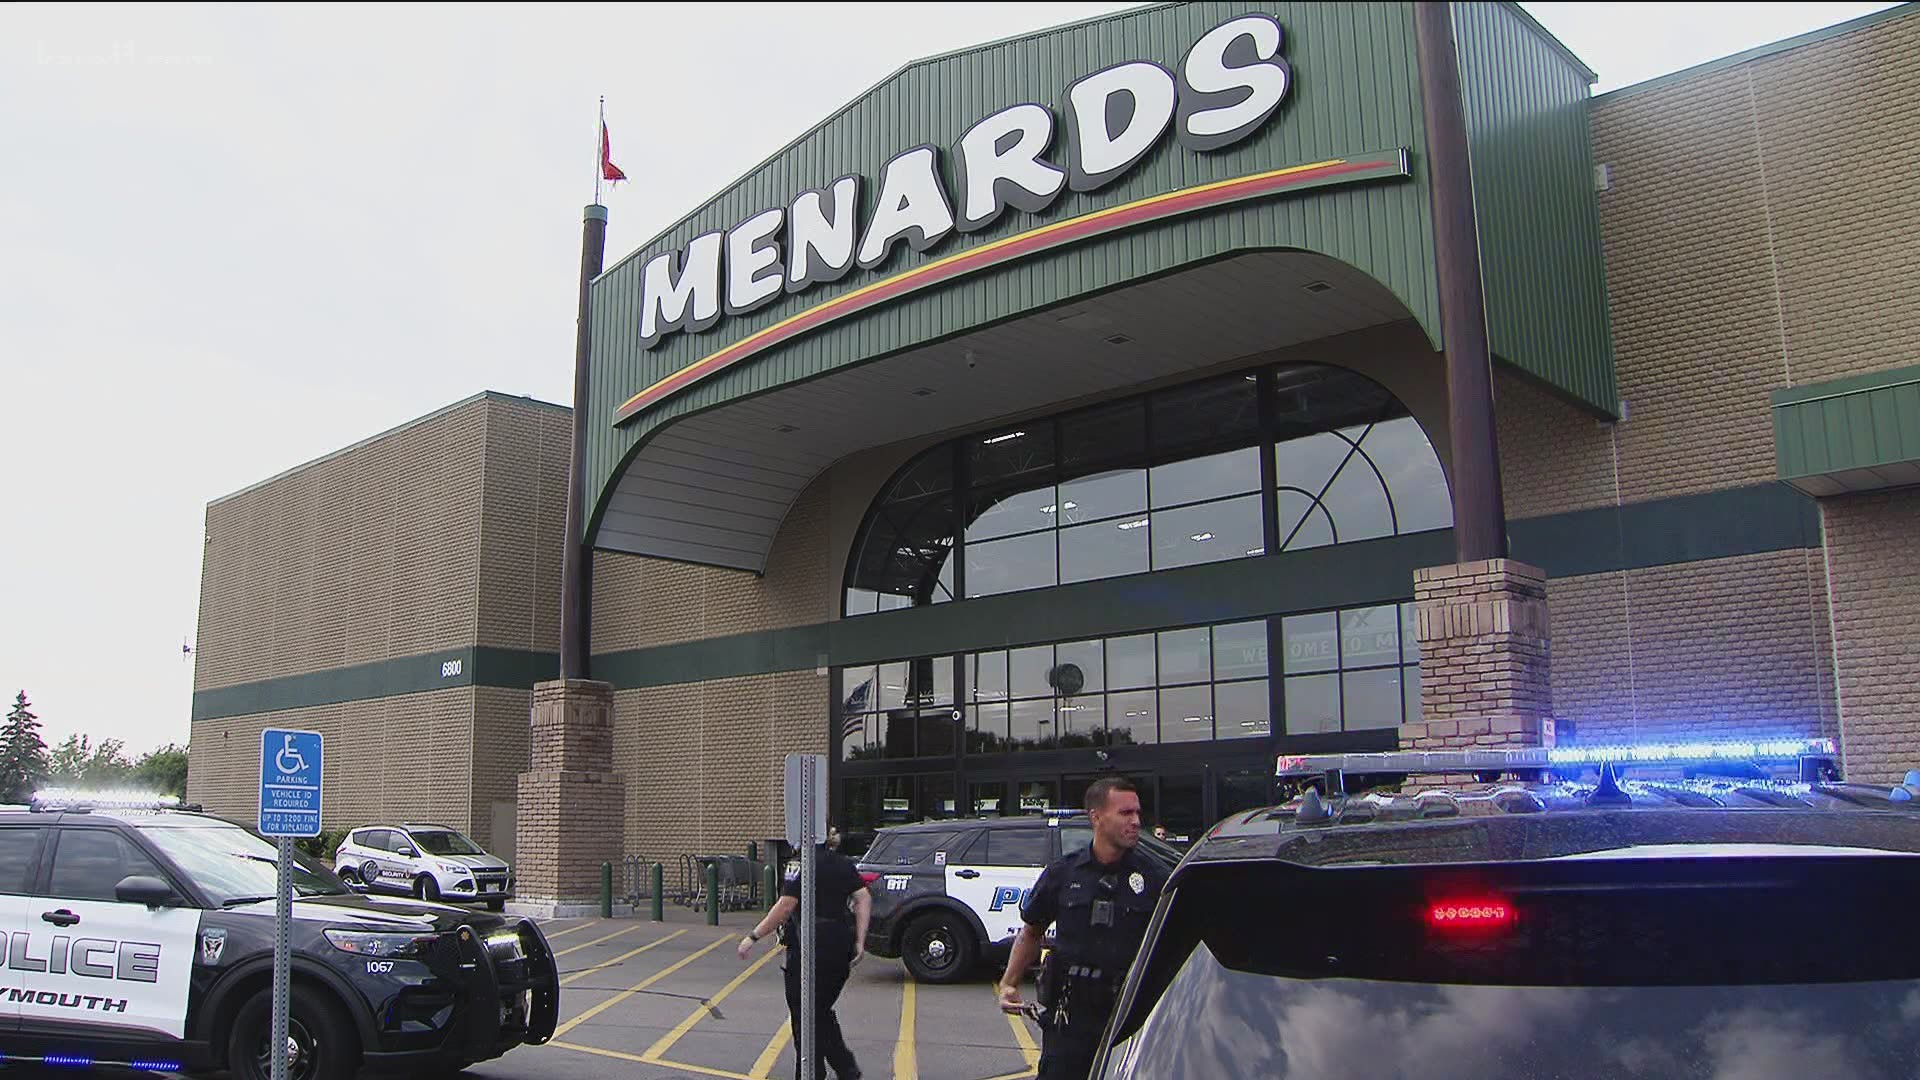 State investigators are looking into the death of a Menards employee who got caught under a forklift Thursday night.